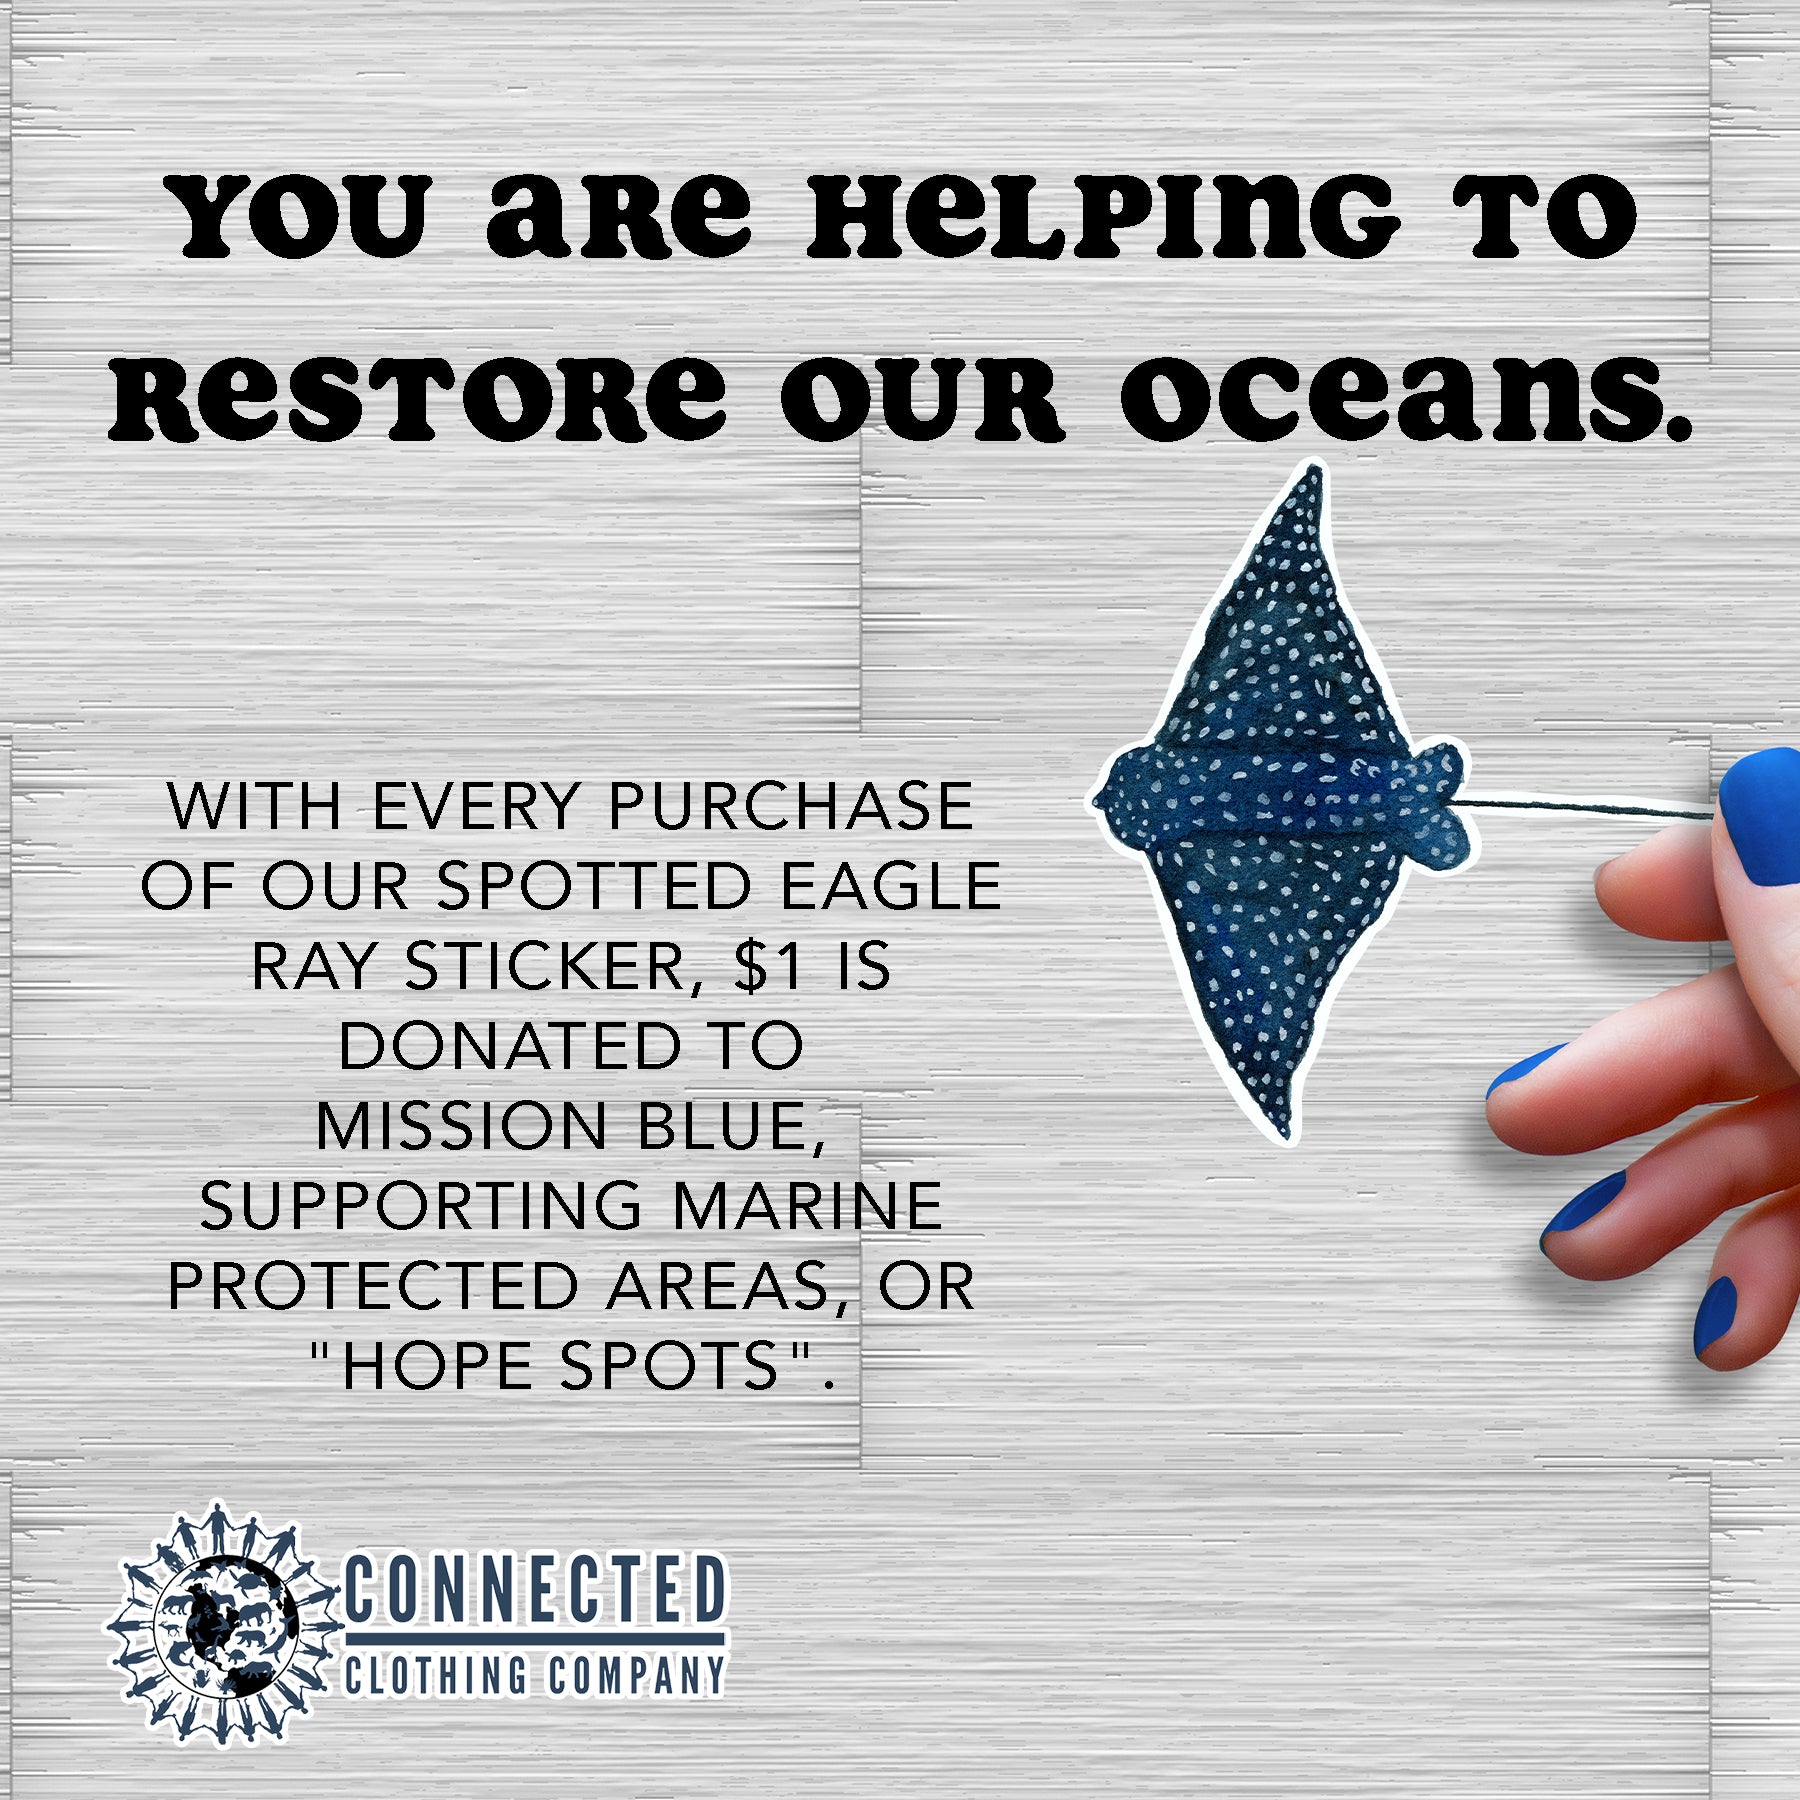 Spotted Eagle Ray Sticker - Connected Clothing Company - 10% donated to ocean conservation - "you are helping to restore our oceans. with every purchase of our spotted eagle ray sticker, $1 is donated to Mission Blue, supporting marine protected areas, or hope spots."